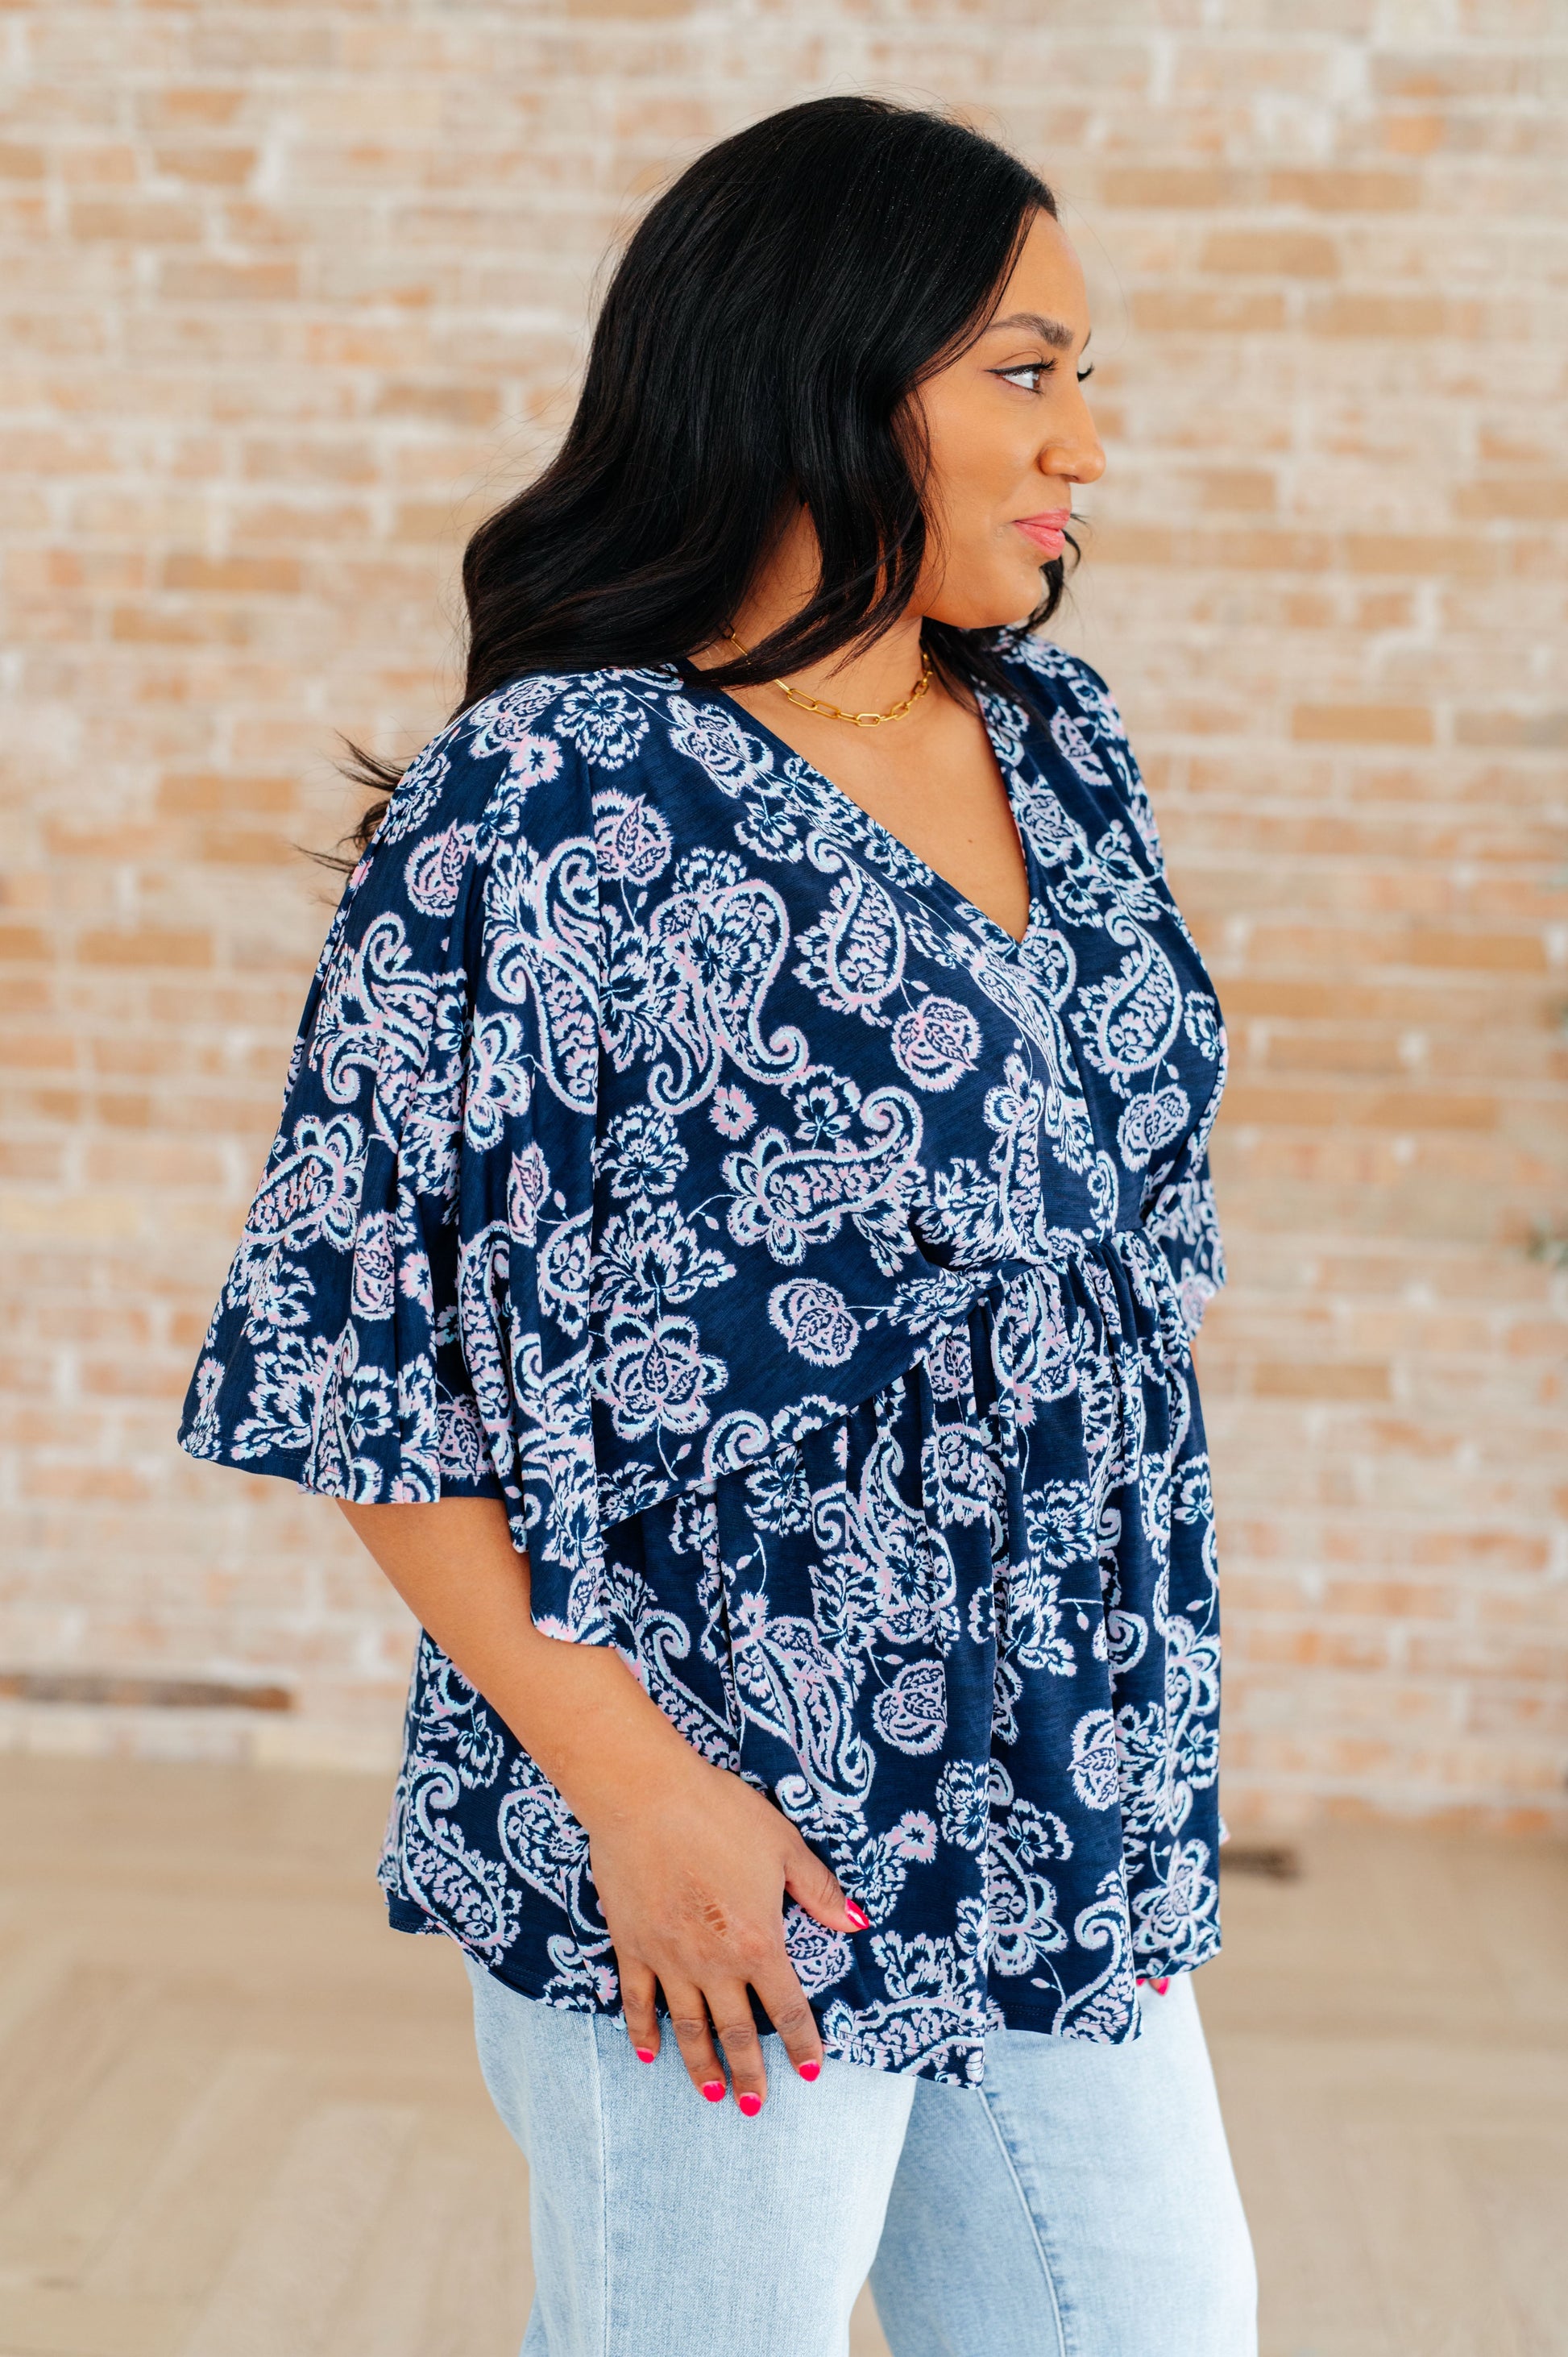 Dreamer Peplum Top in Navy and Pink Paisley - Southern Divas Boutique